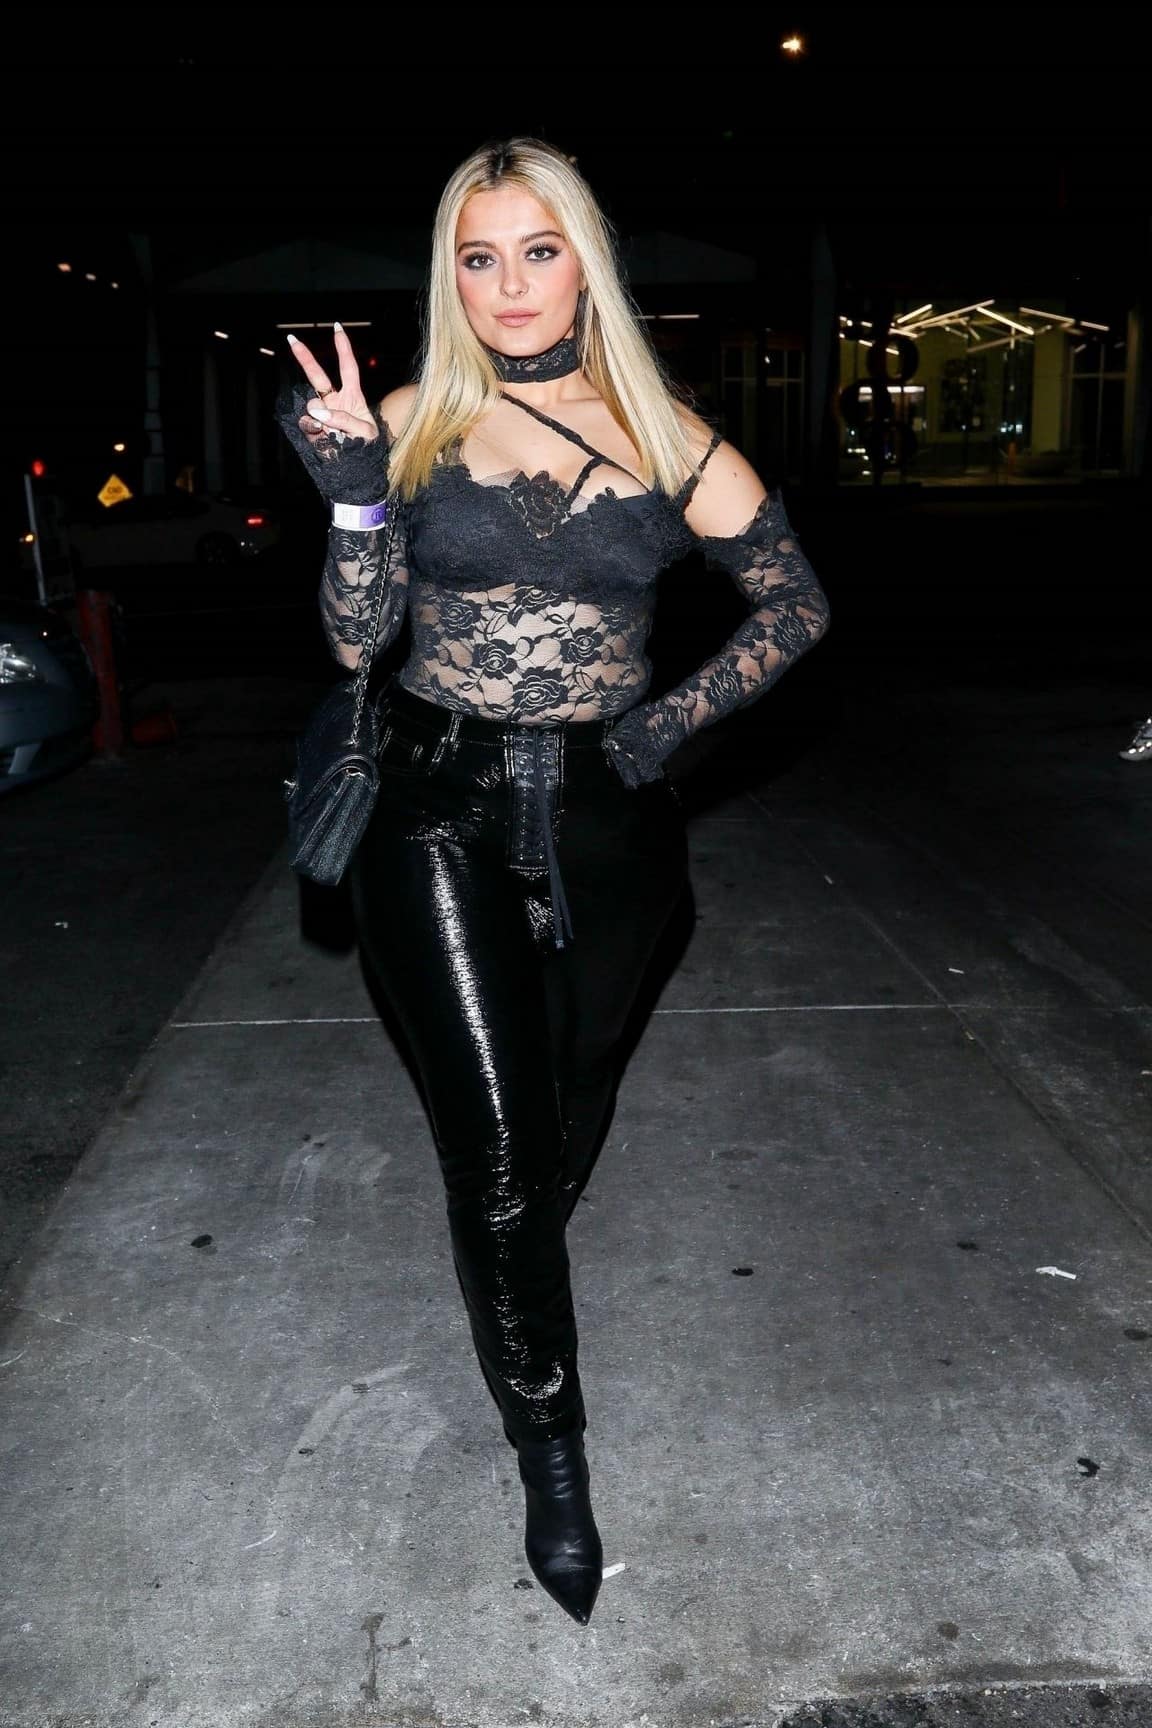 Bebe Rexha Goes Seductive in a Lacy Top while on a Date with her Boyfriend